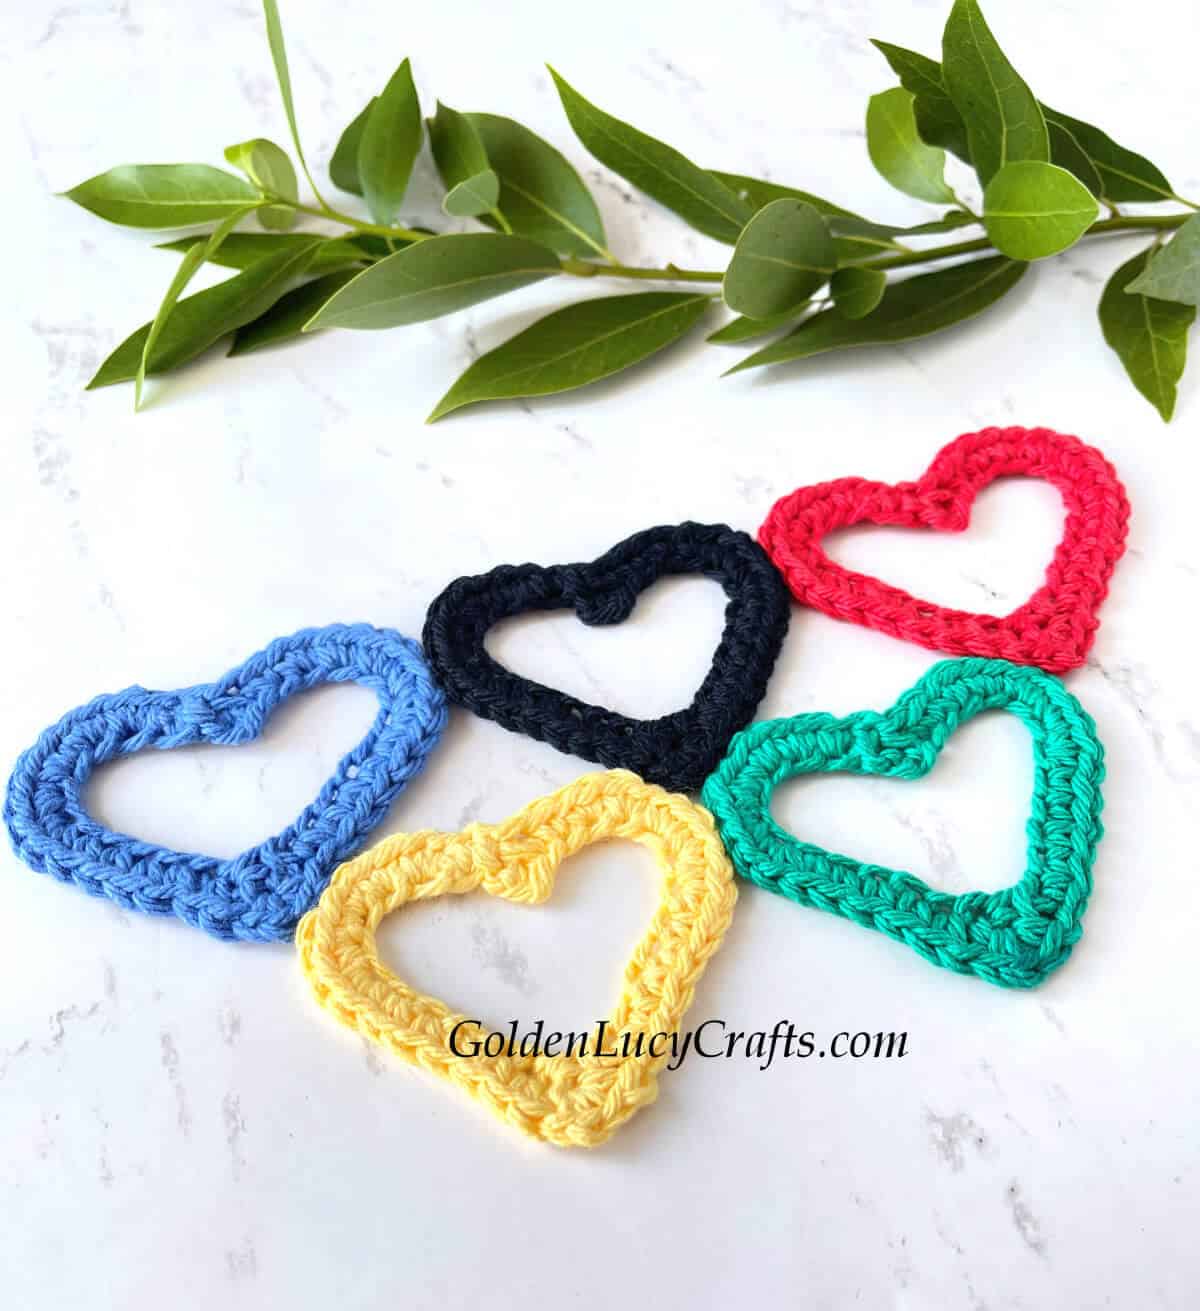 Crocheted heart-shaped Olympic rings close up picture.